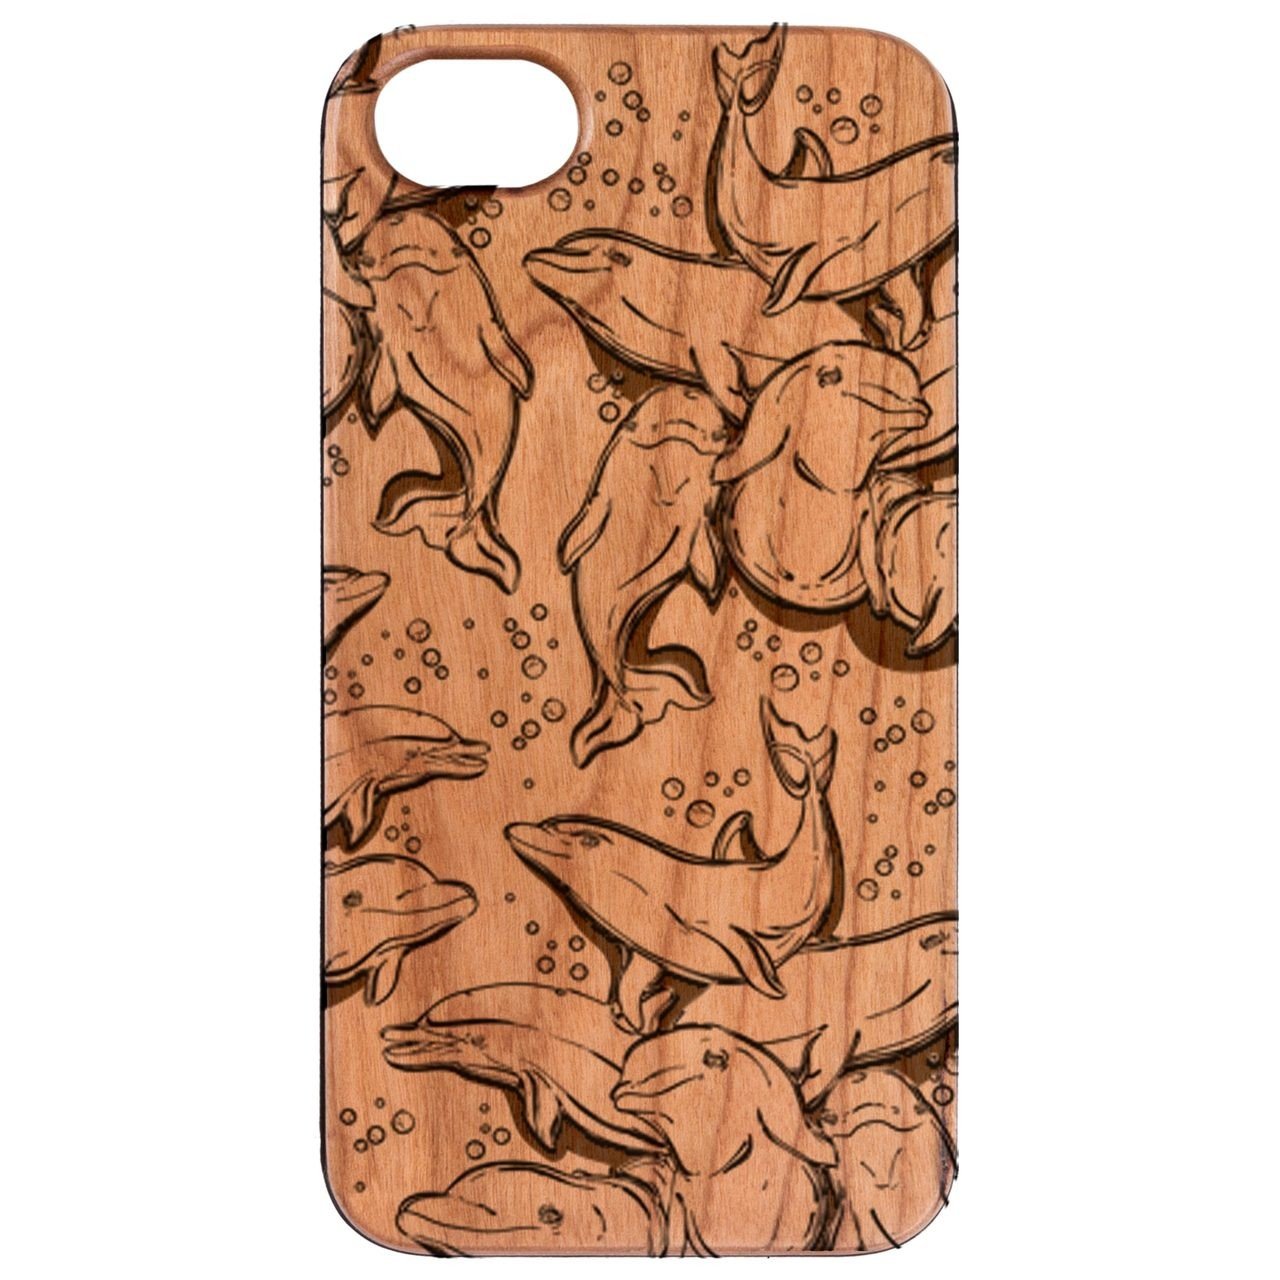 Dolphins - Engraved - Wooden Phone Case